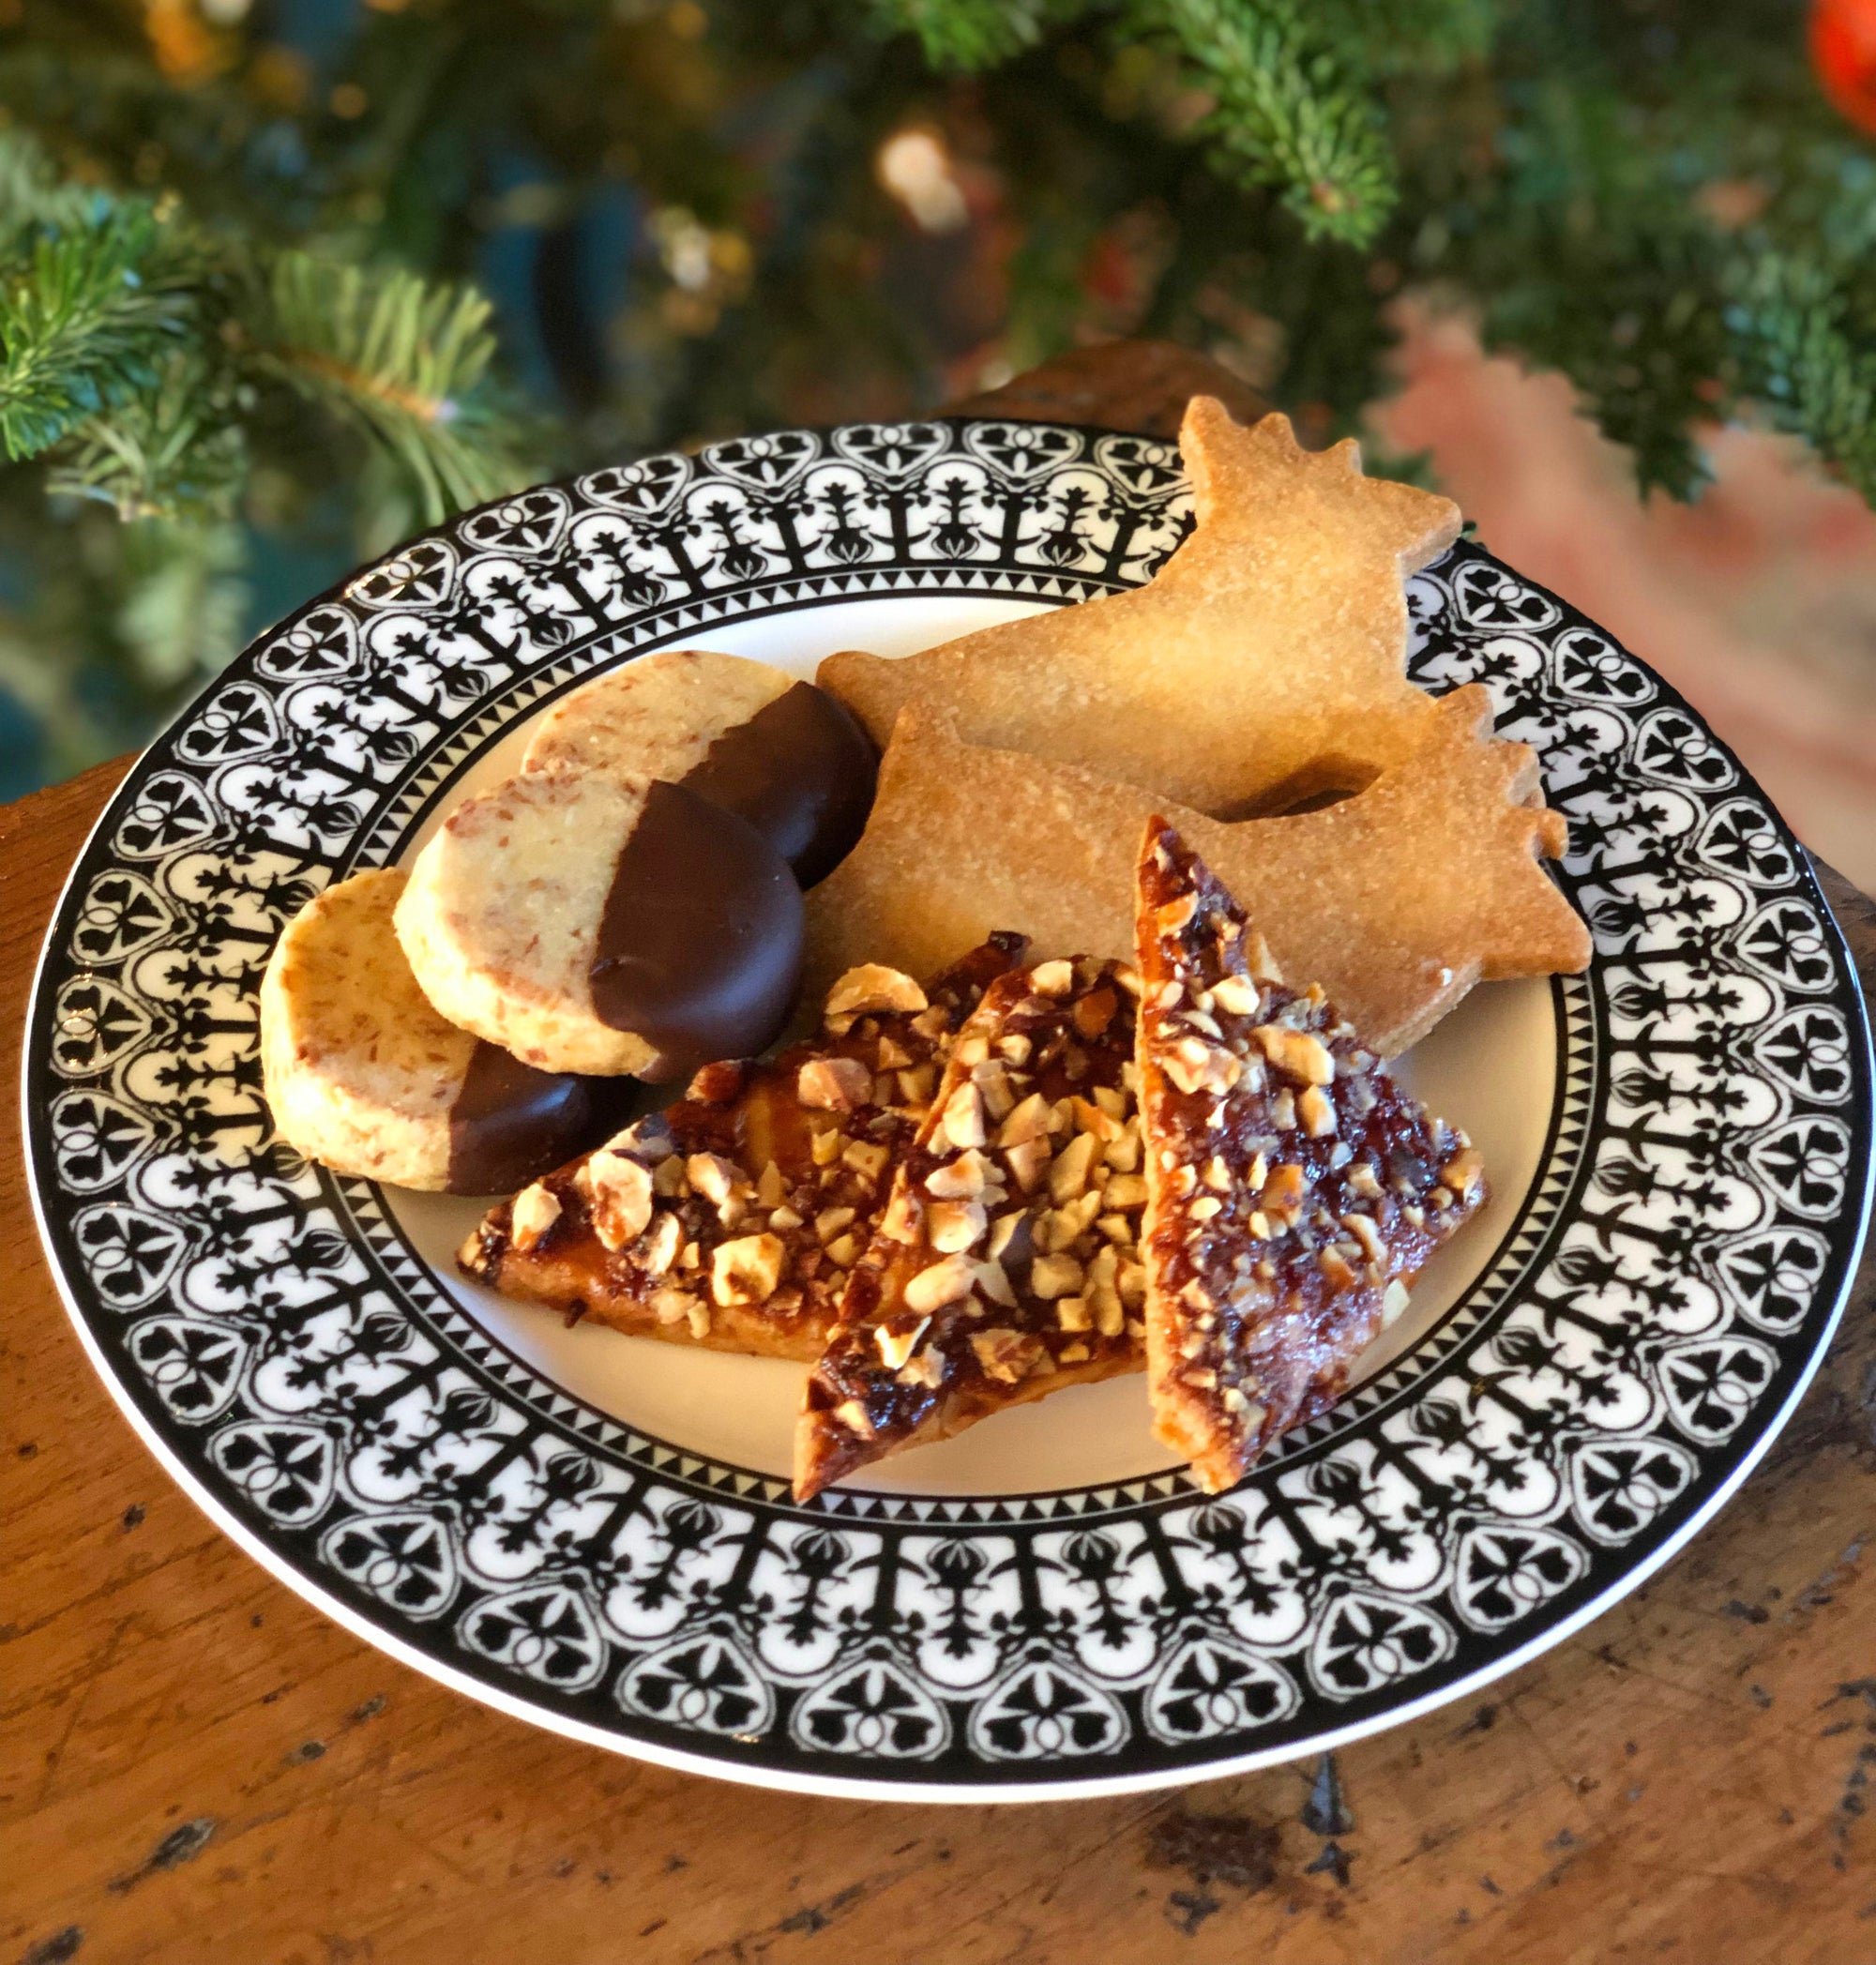 Butter cookies, raspberry hazelnut cookies, coconut cookies dipped in chocolate, Christmas cookies on a Casablanca Salad Plate